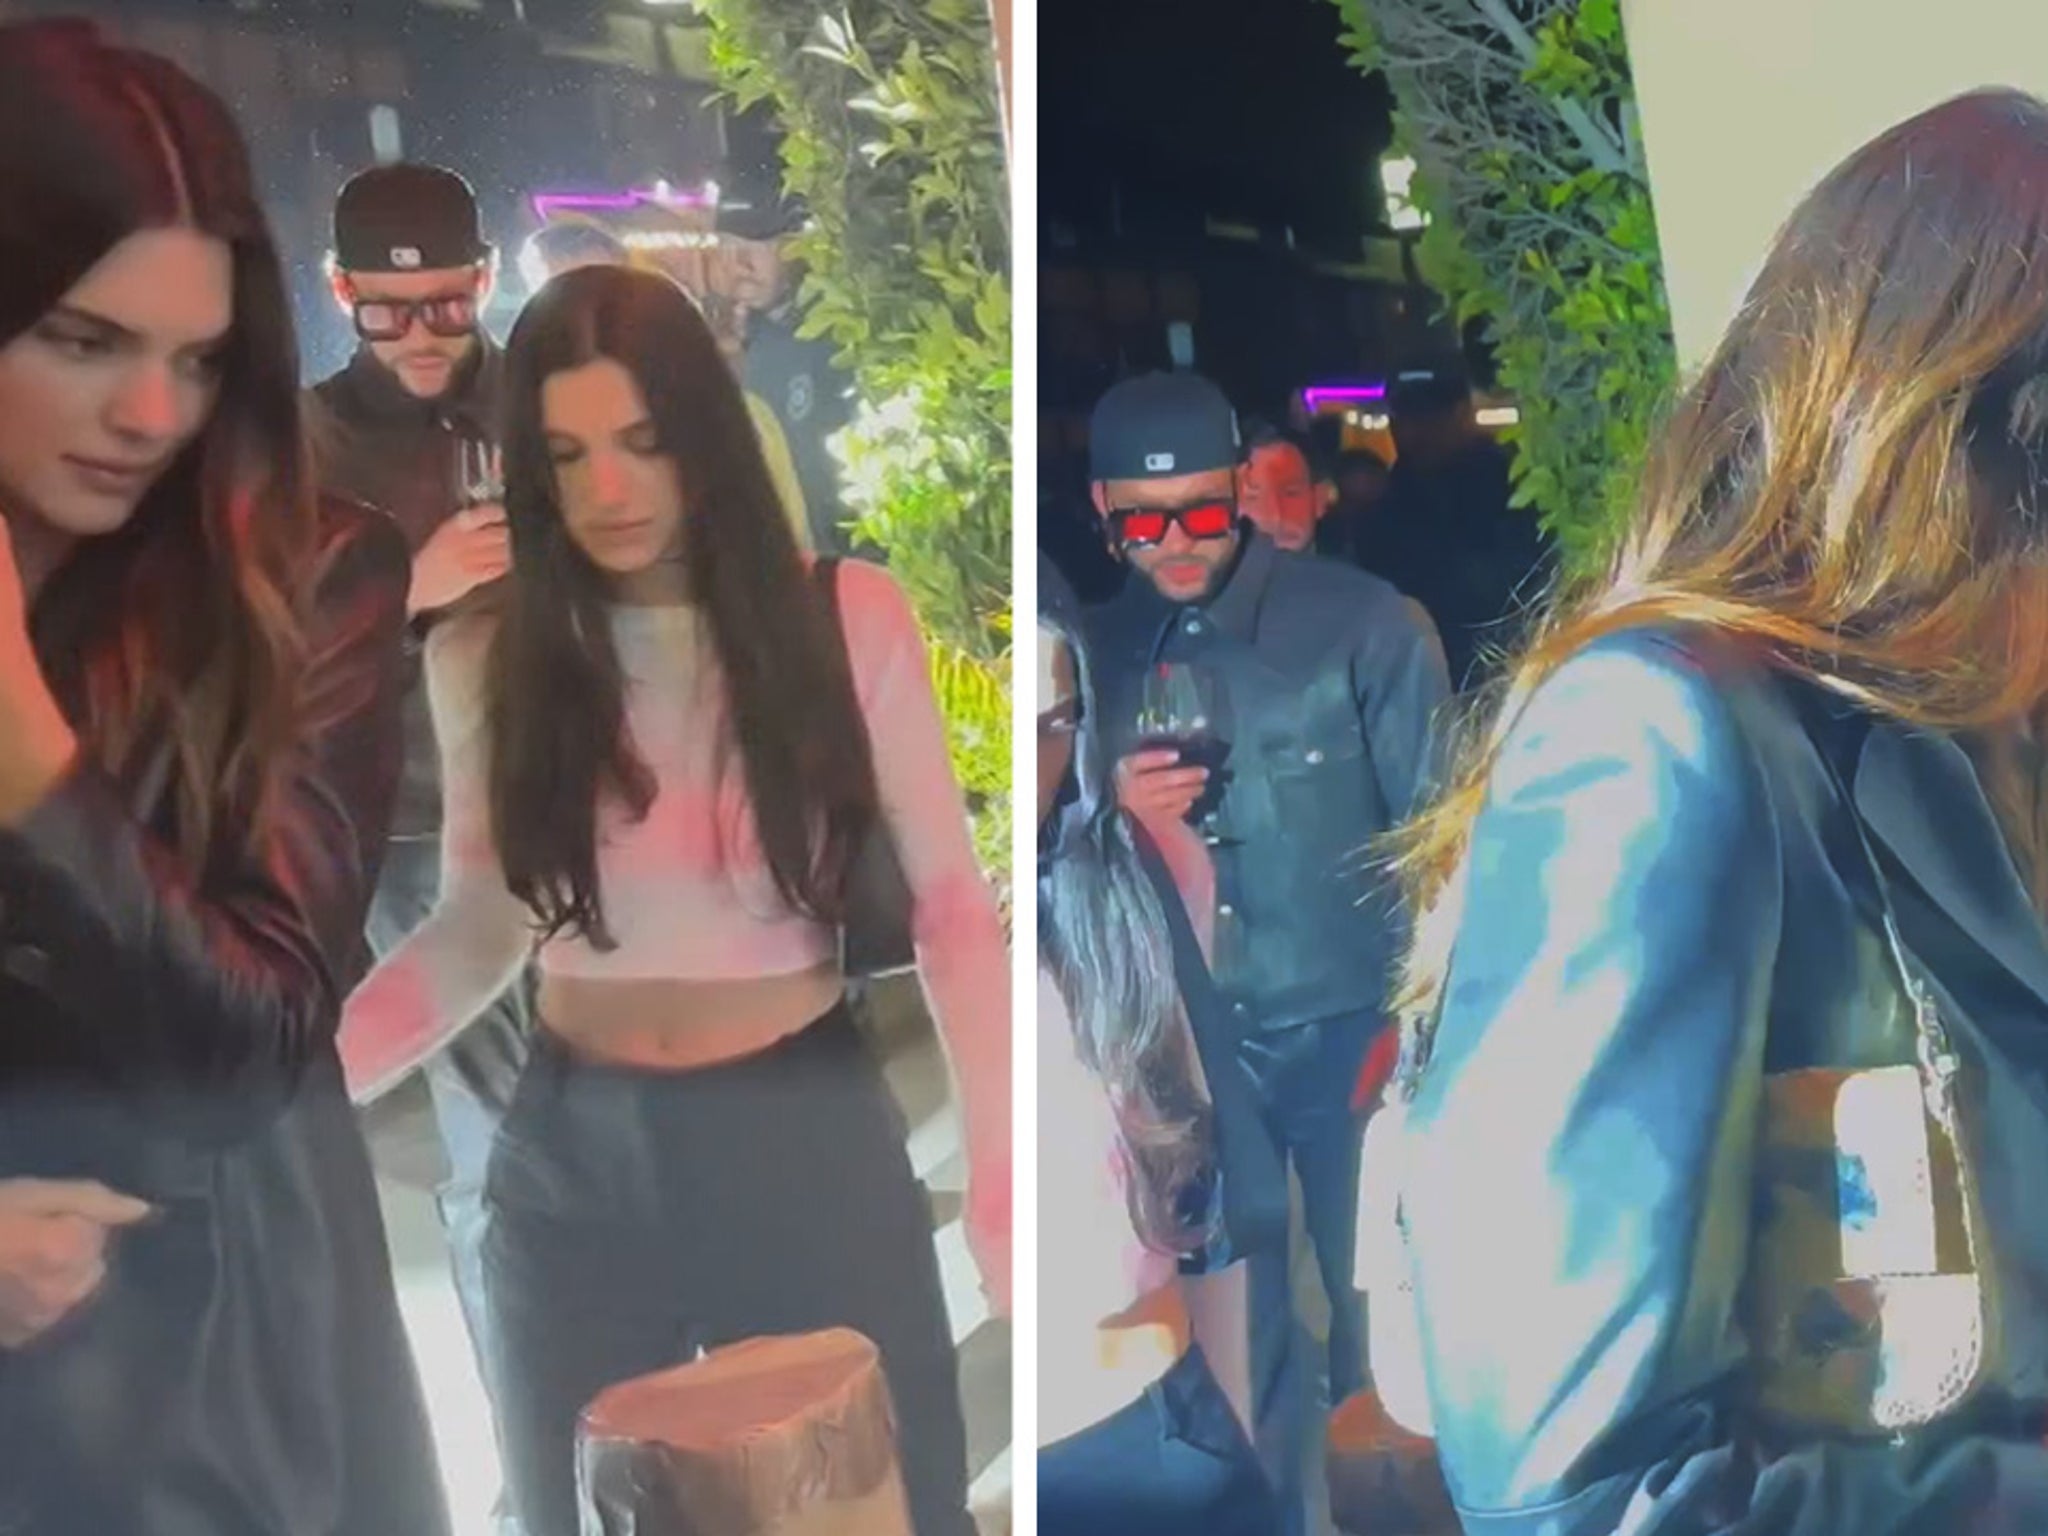 Kendall Jenner and Bad Bunny Out at Birthday Bash in Matching Outfits